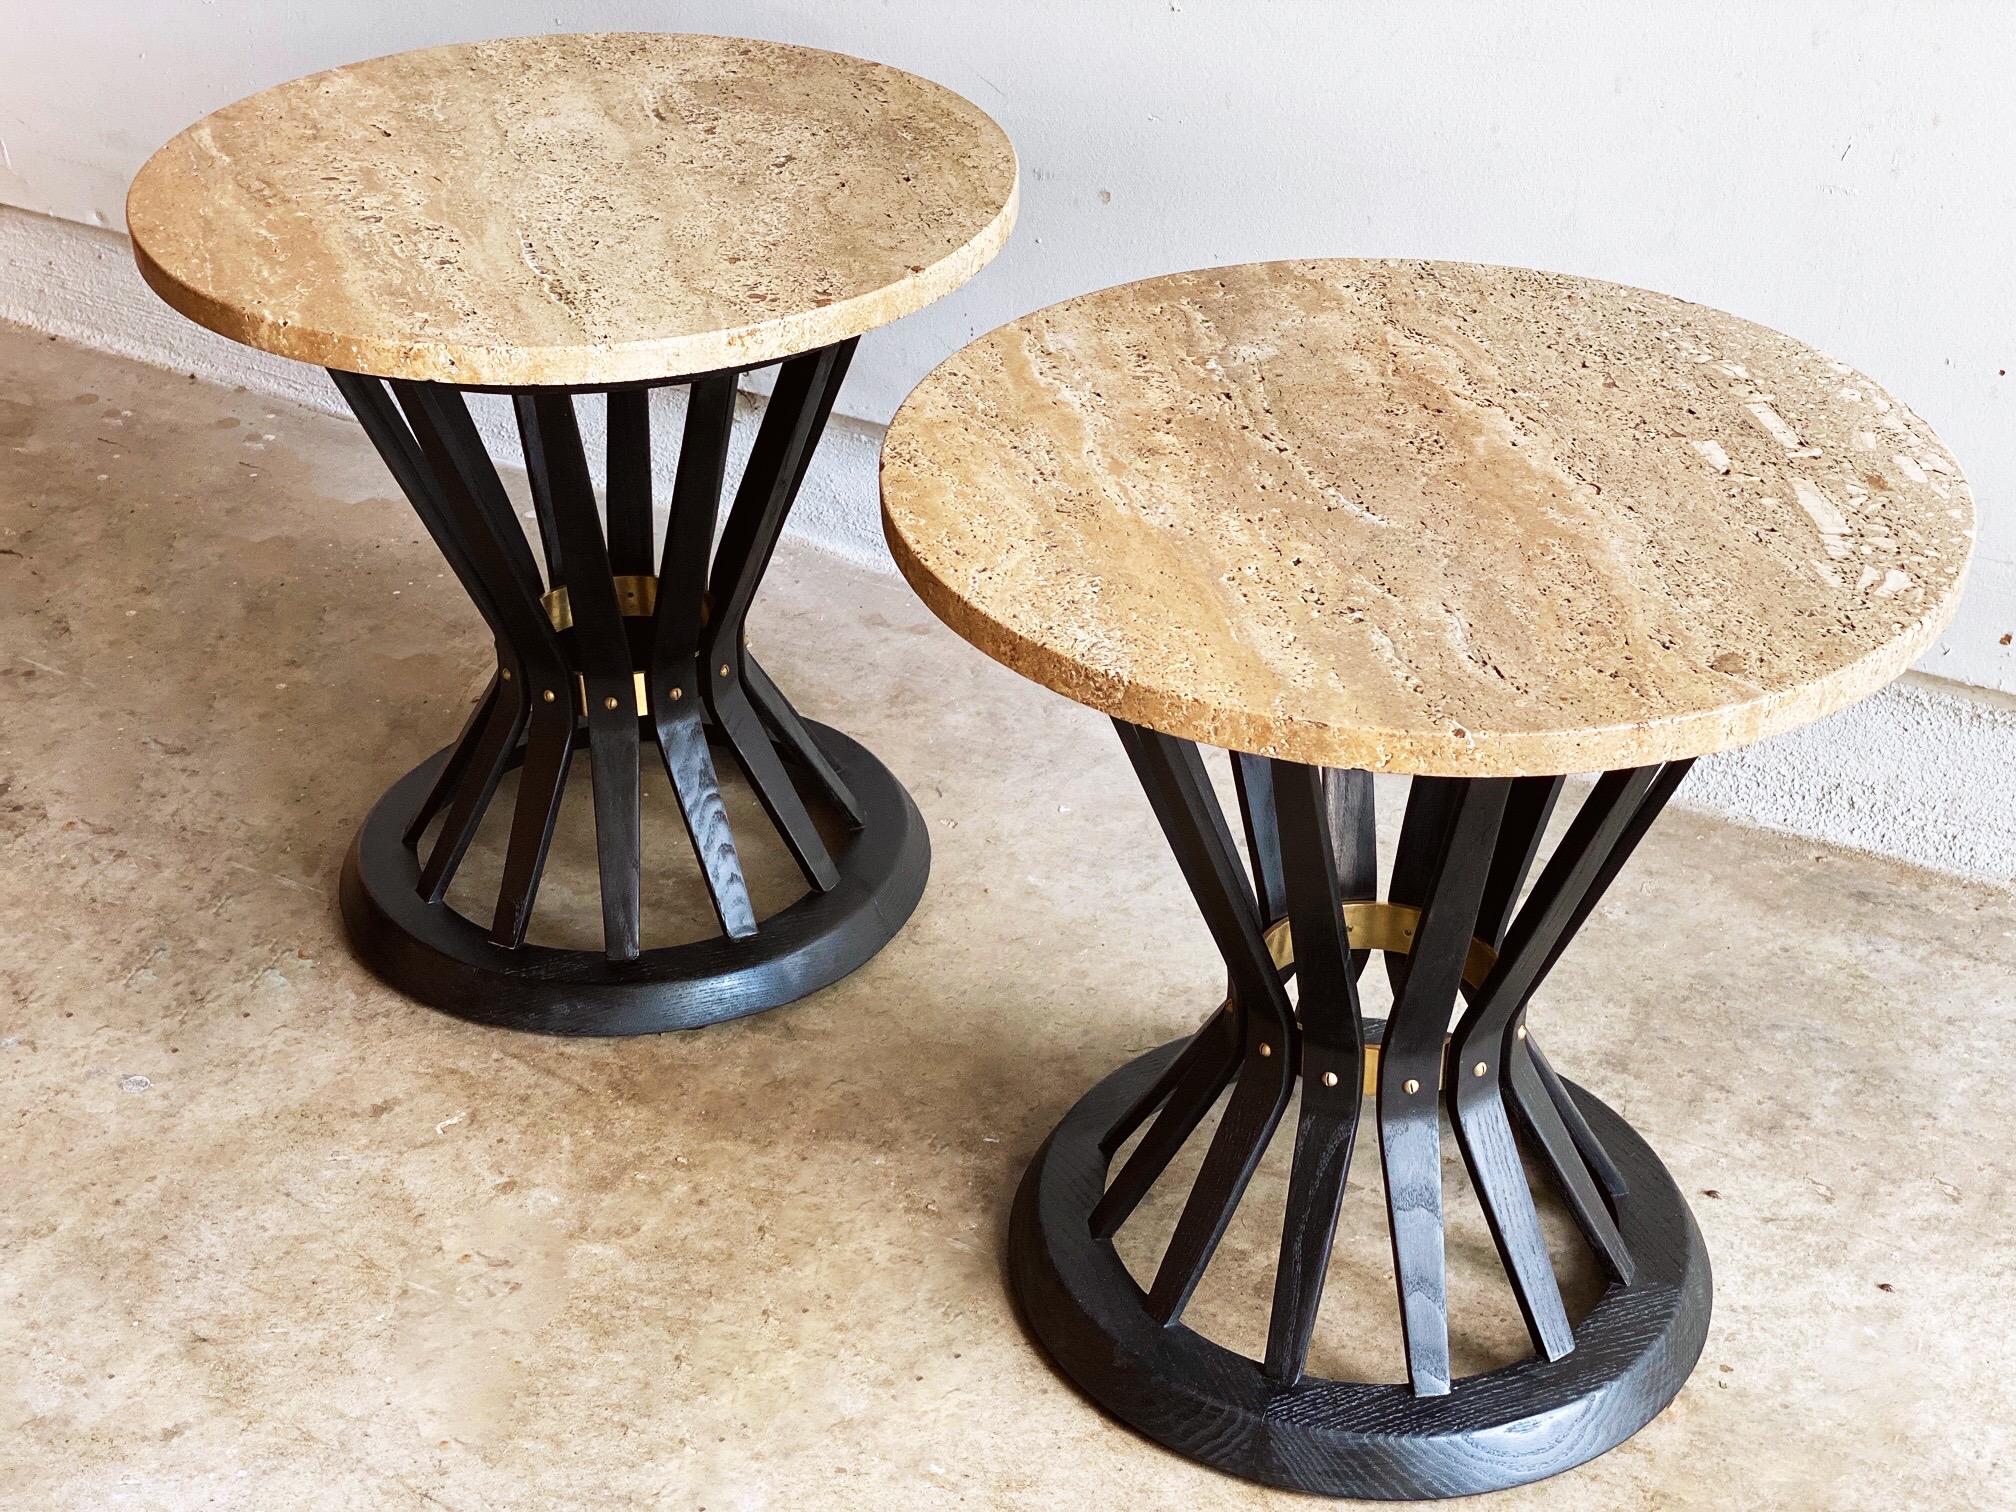 Pair of Round Travertine Tables by Edward Wormley for Dunbar Furniture Corp. 1